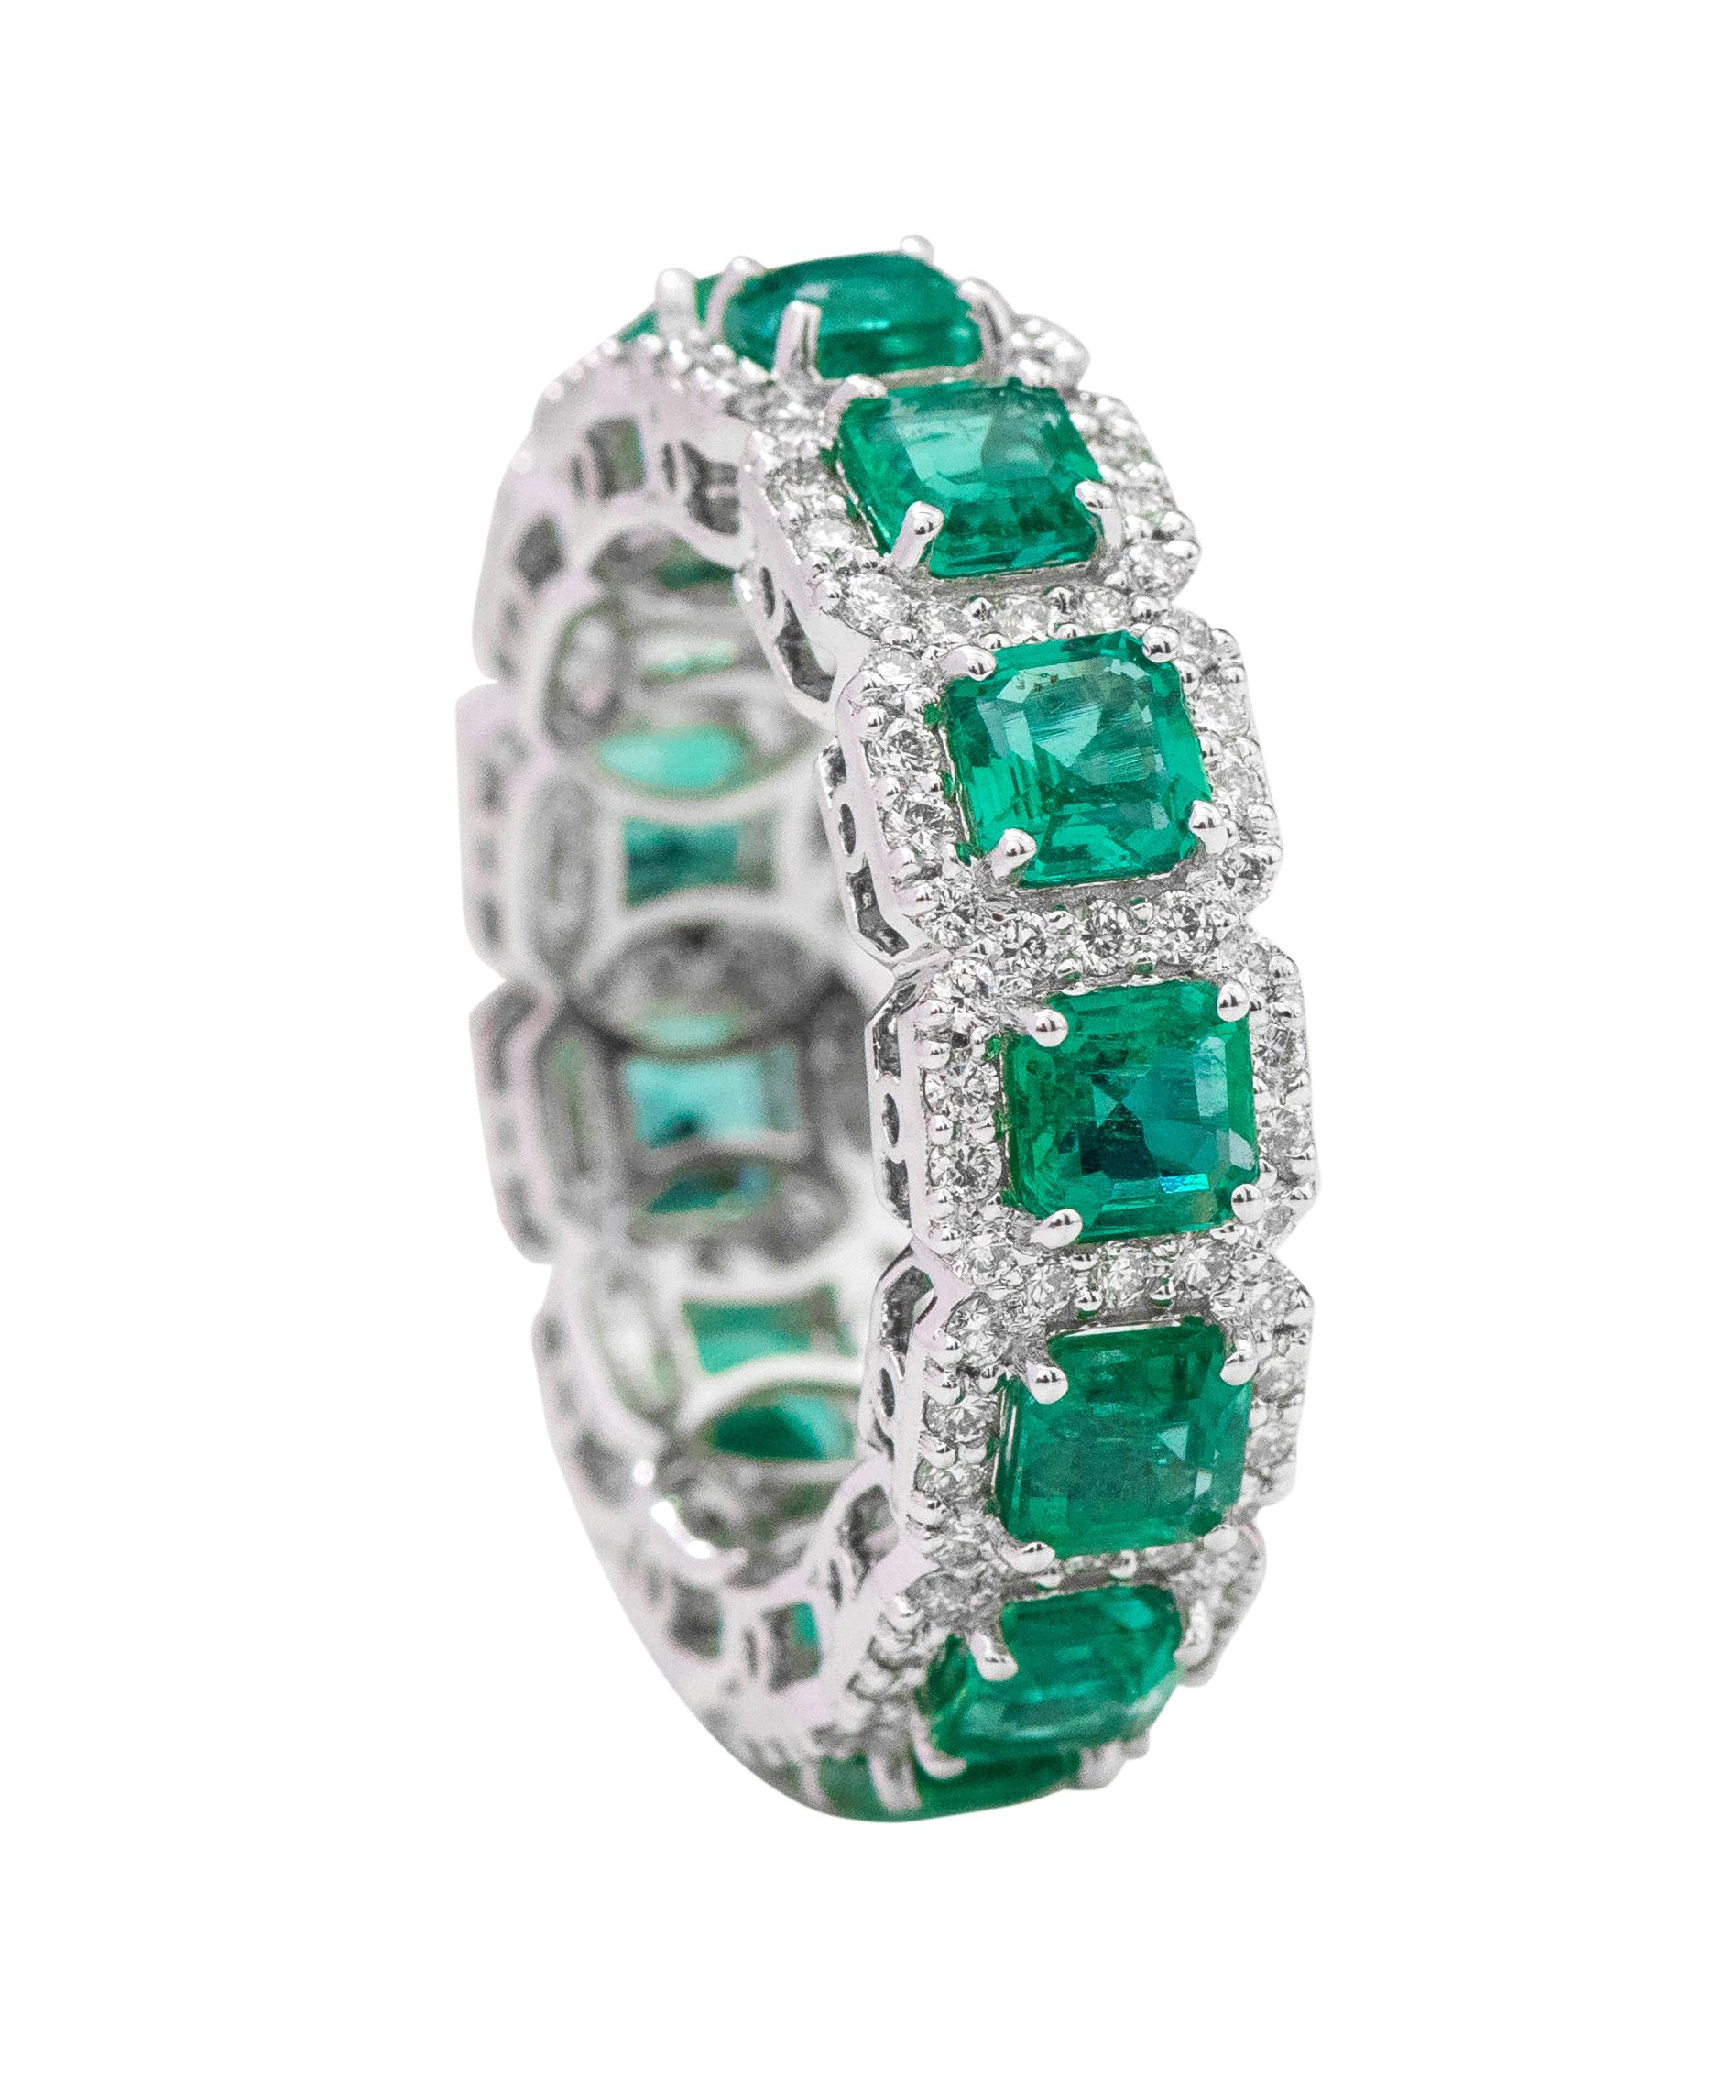 18 Karat White Gold 4.12 Carat Emerald-Cut Natural Emerald and Diamond Eternity Band Ring

This masterful lush green emerald and diamond cluster band is remarkably brilliant. The solitaire emerald-cut emeralds are magnificently surrounded with a